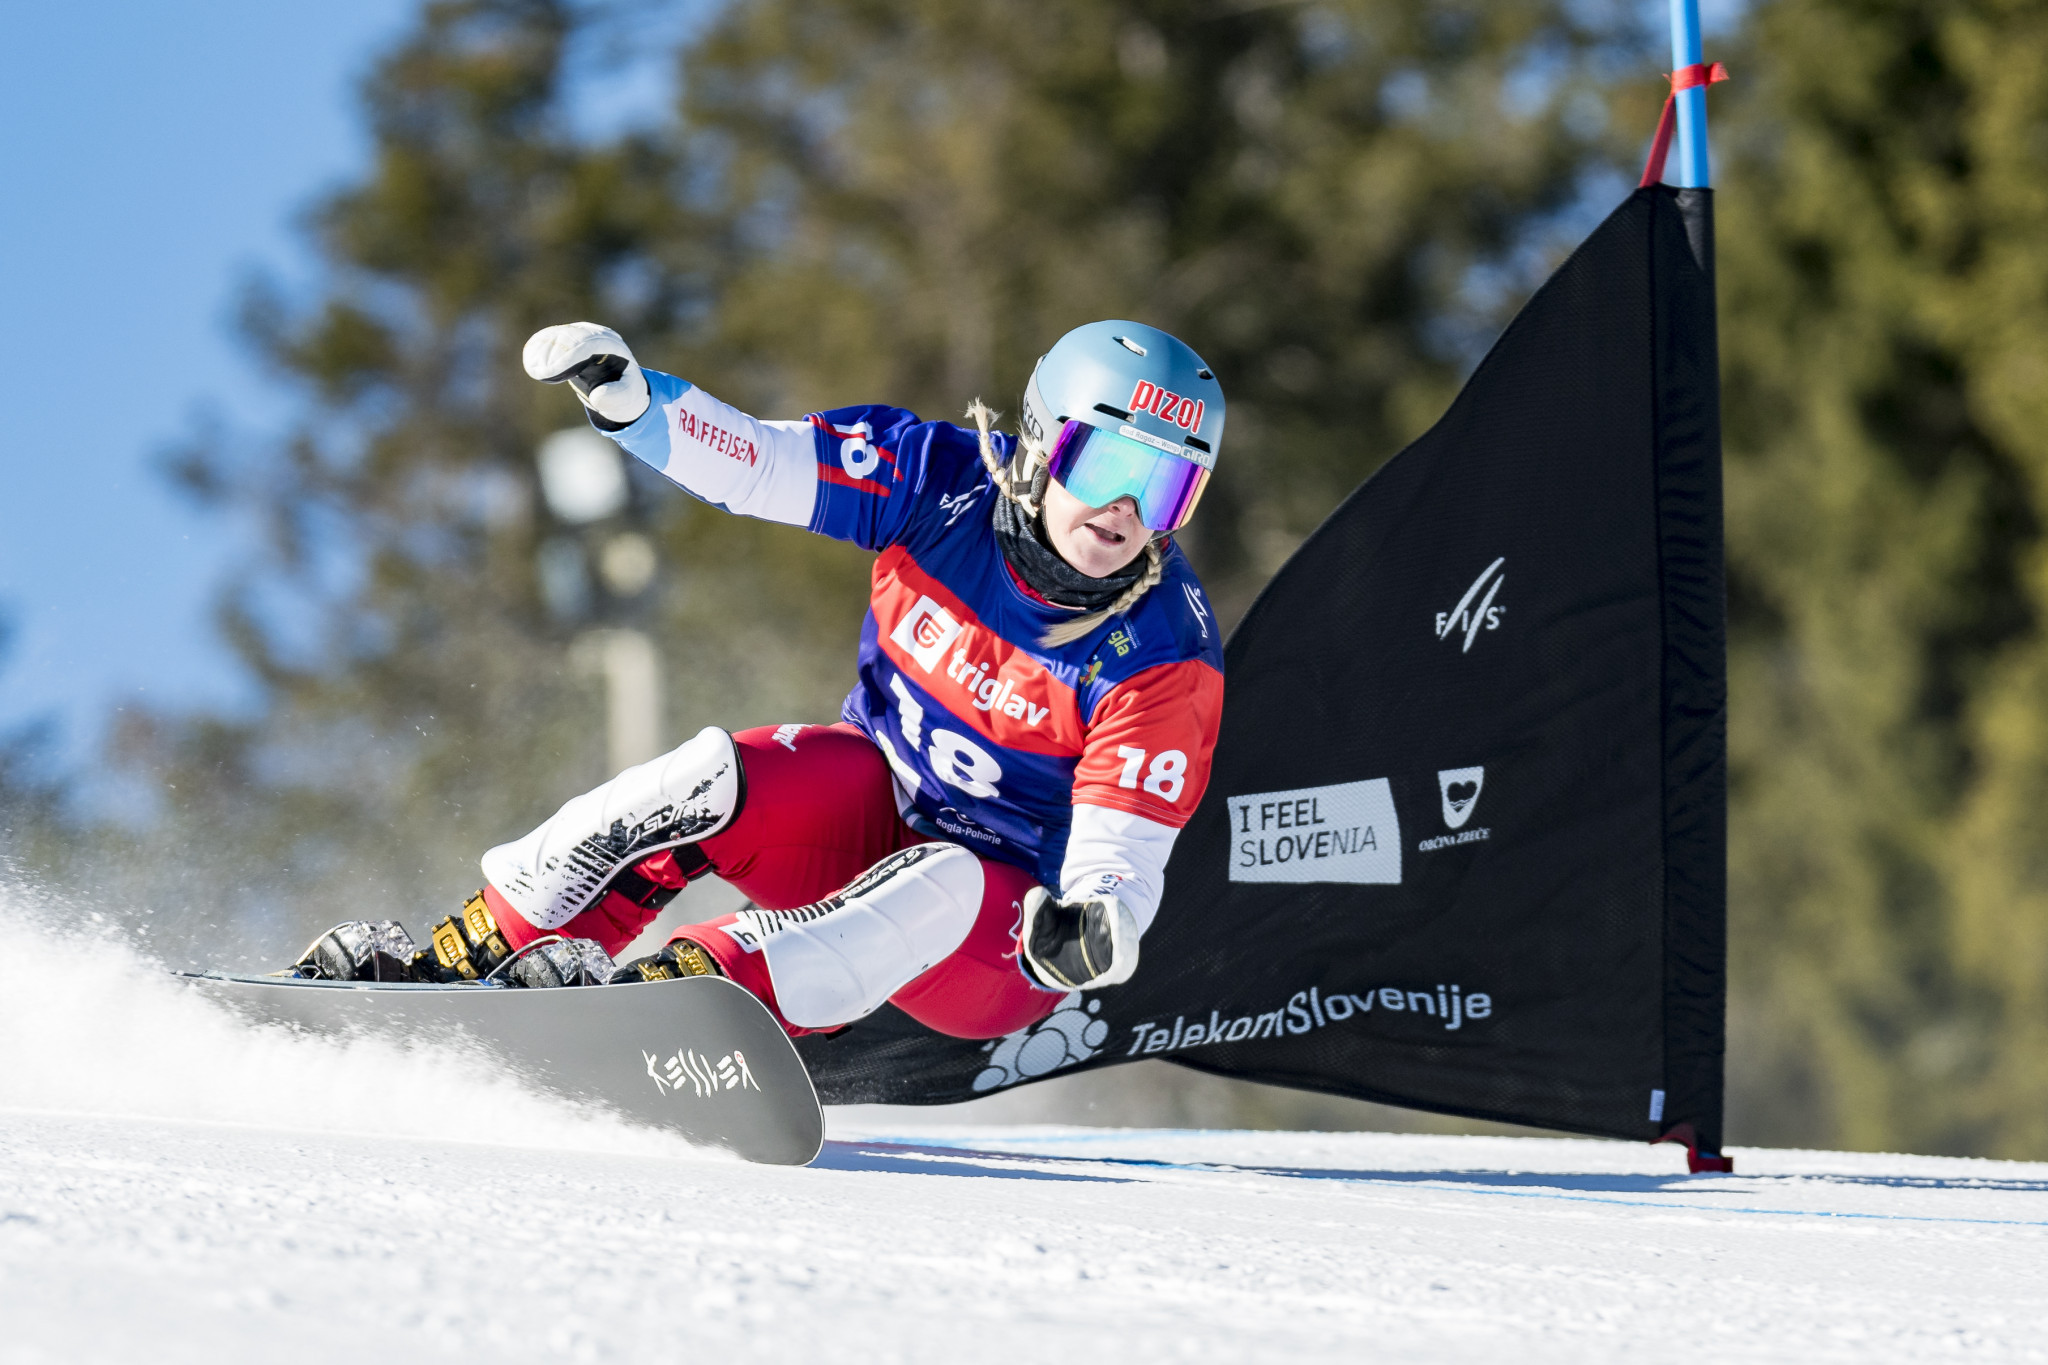 Swiss Snowboard selects 13 athletes on national team for 2021-2022 season